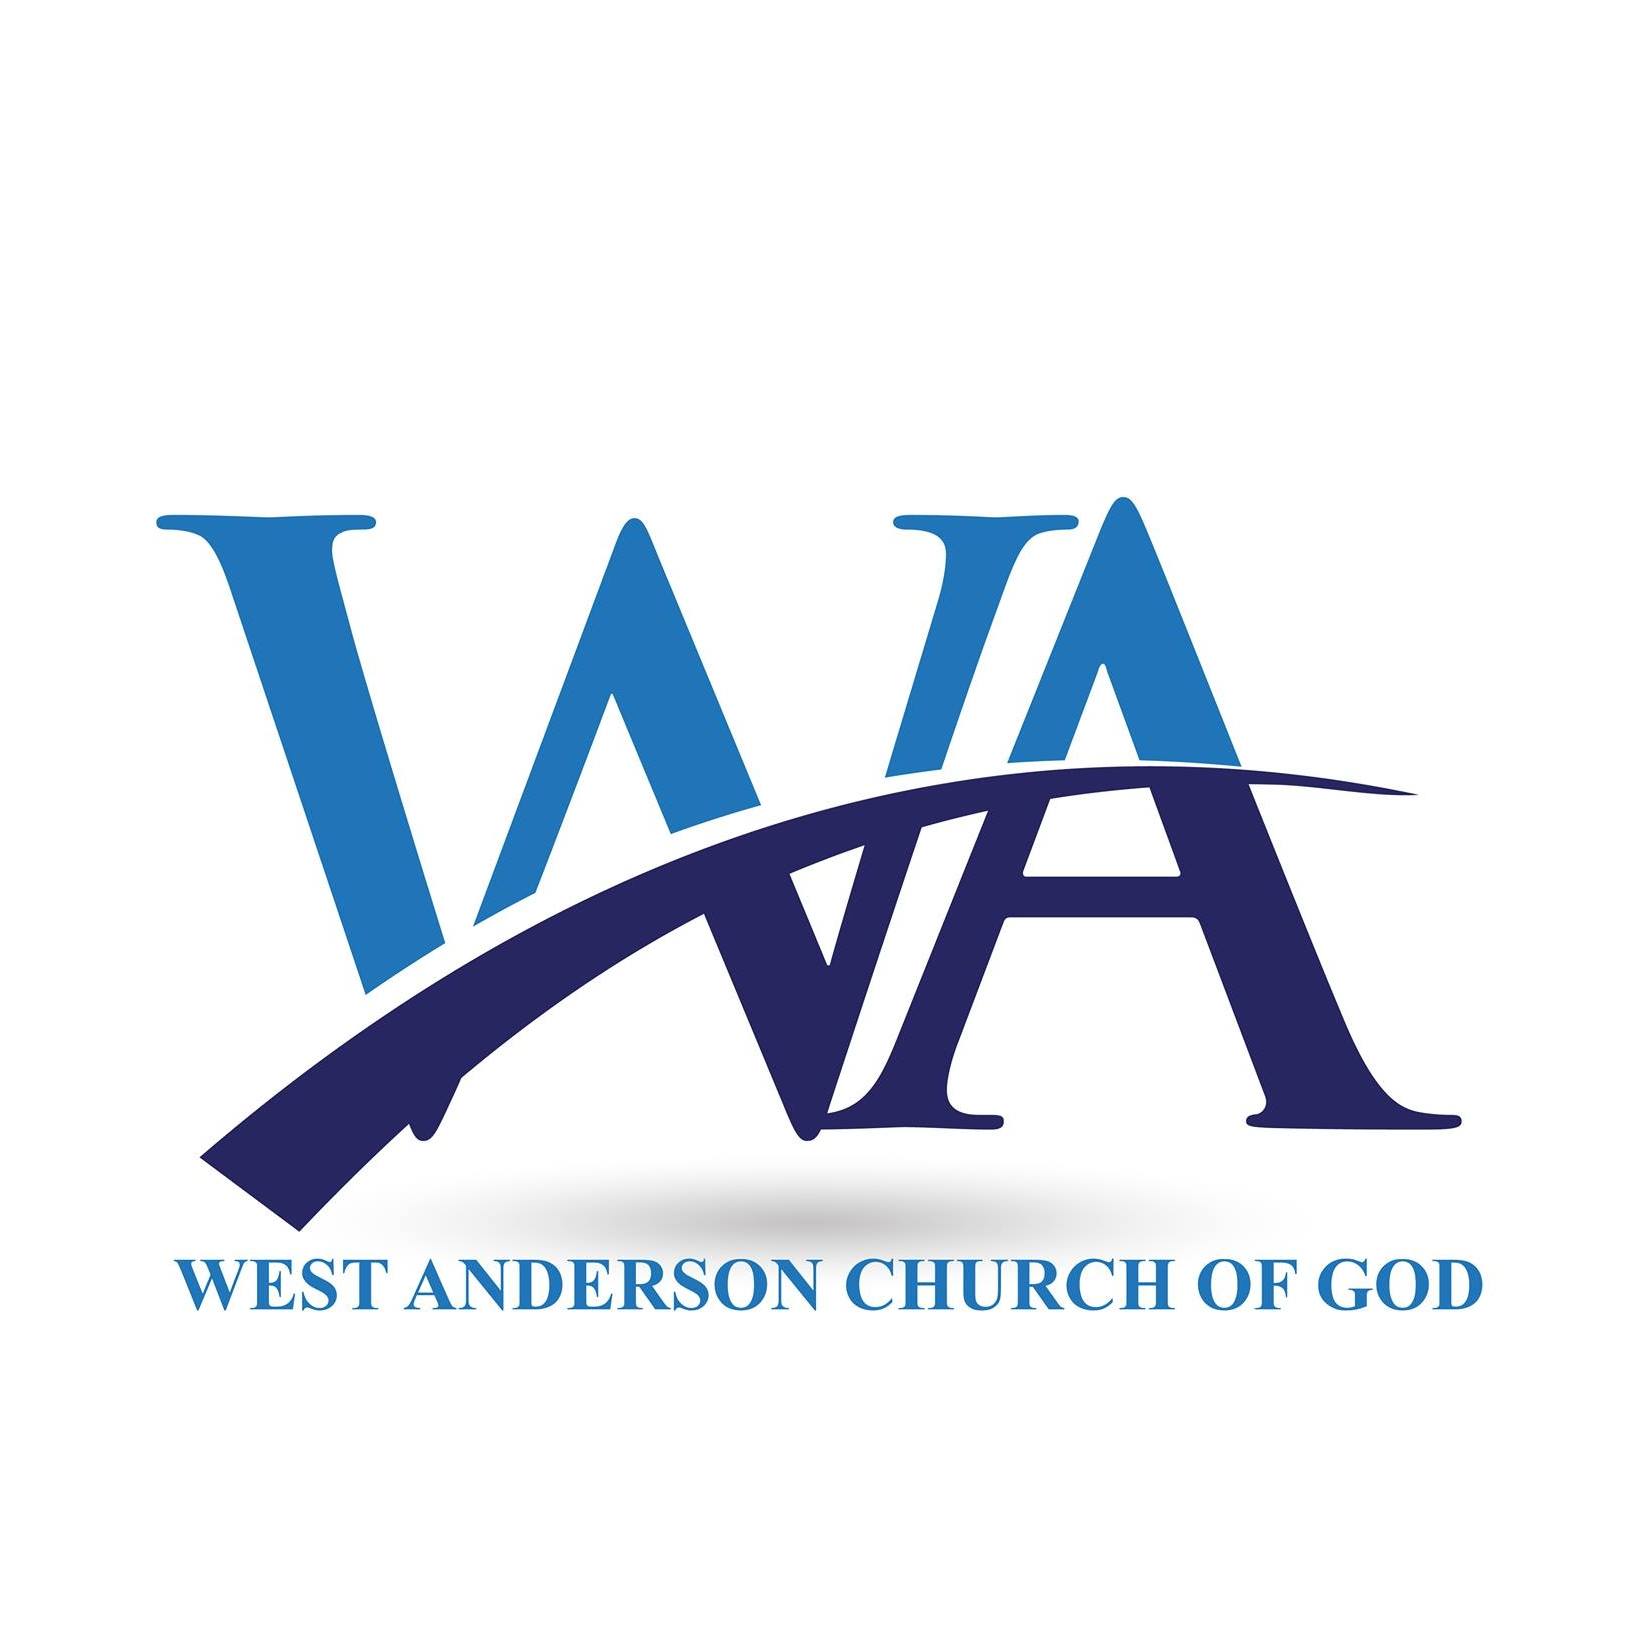 West Anderson Church of God